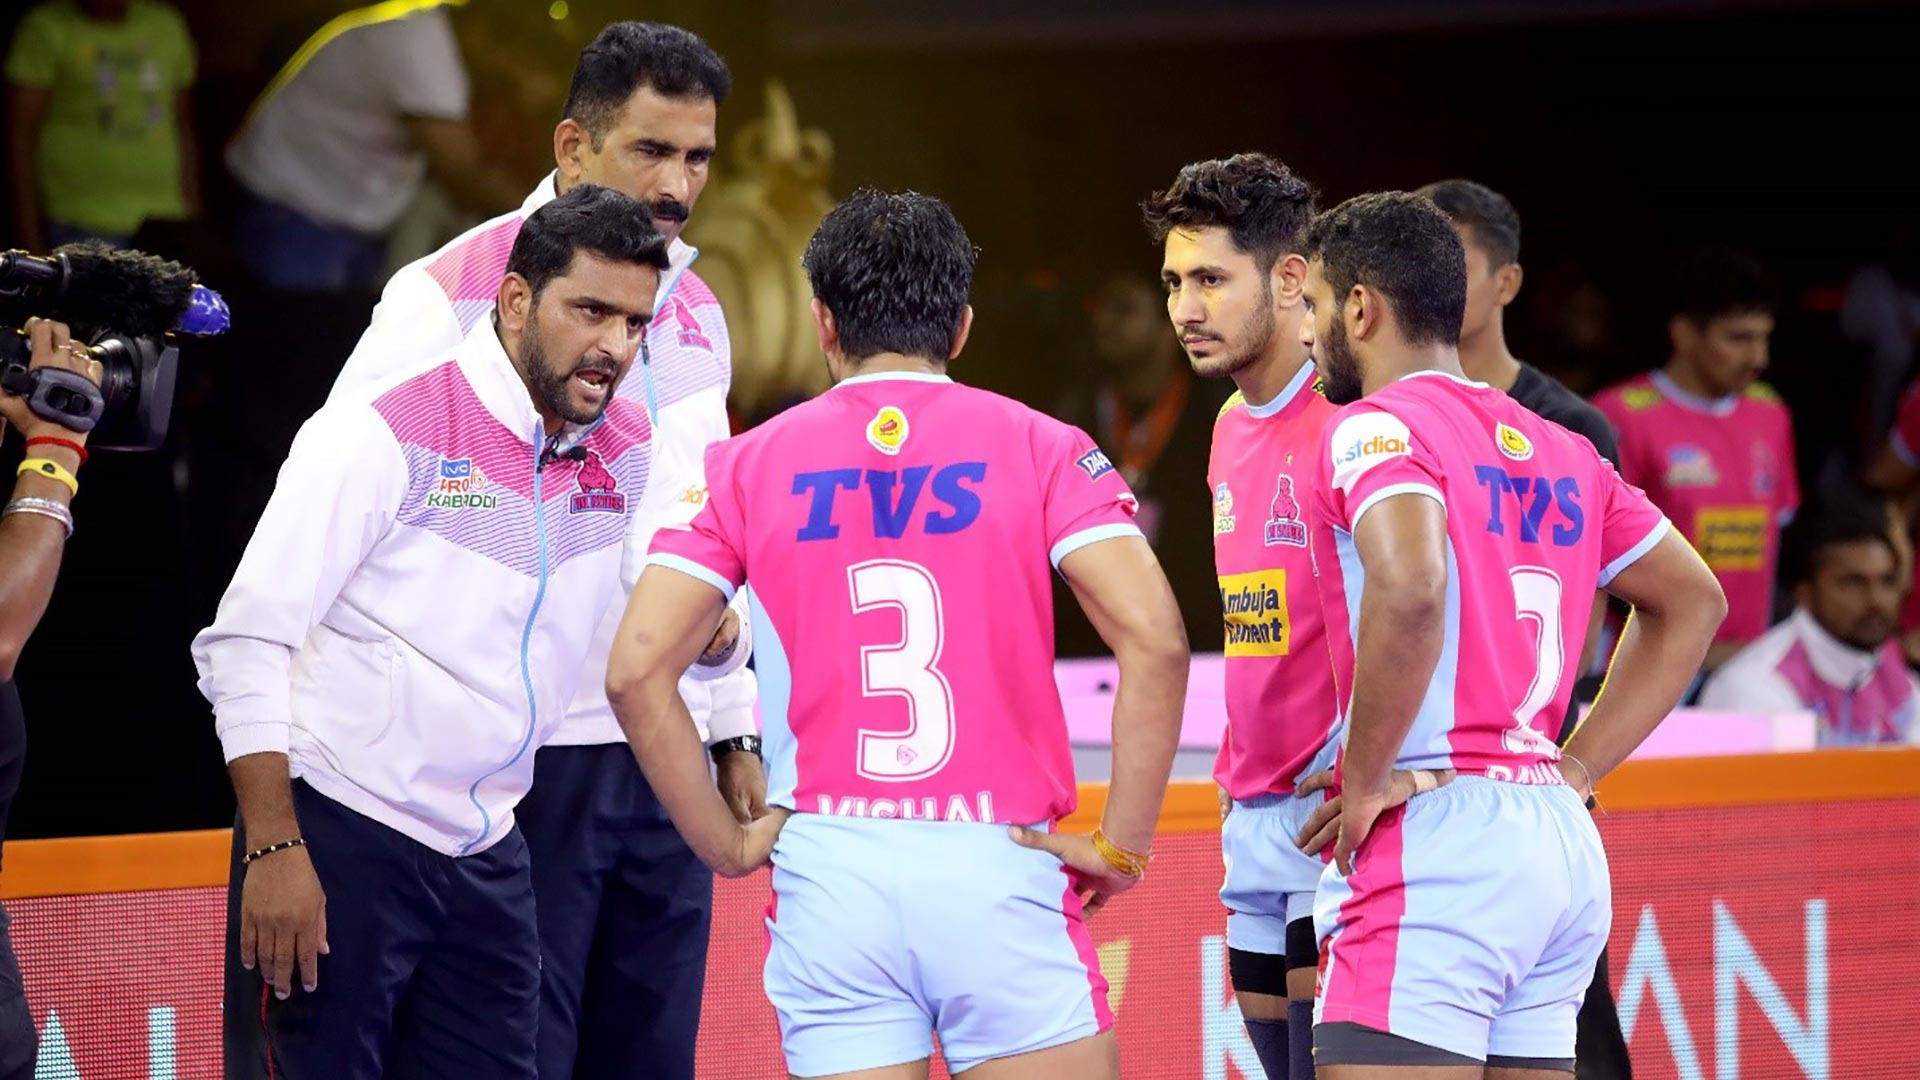 PKL 2019 | Told players to play for respect, says Srinivas Reddy